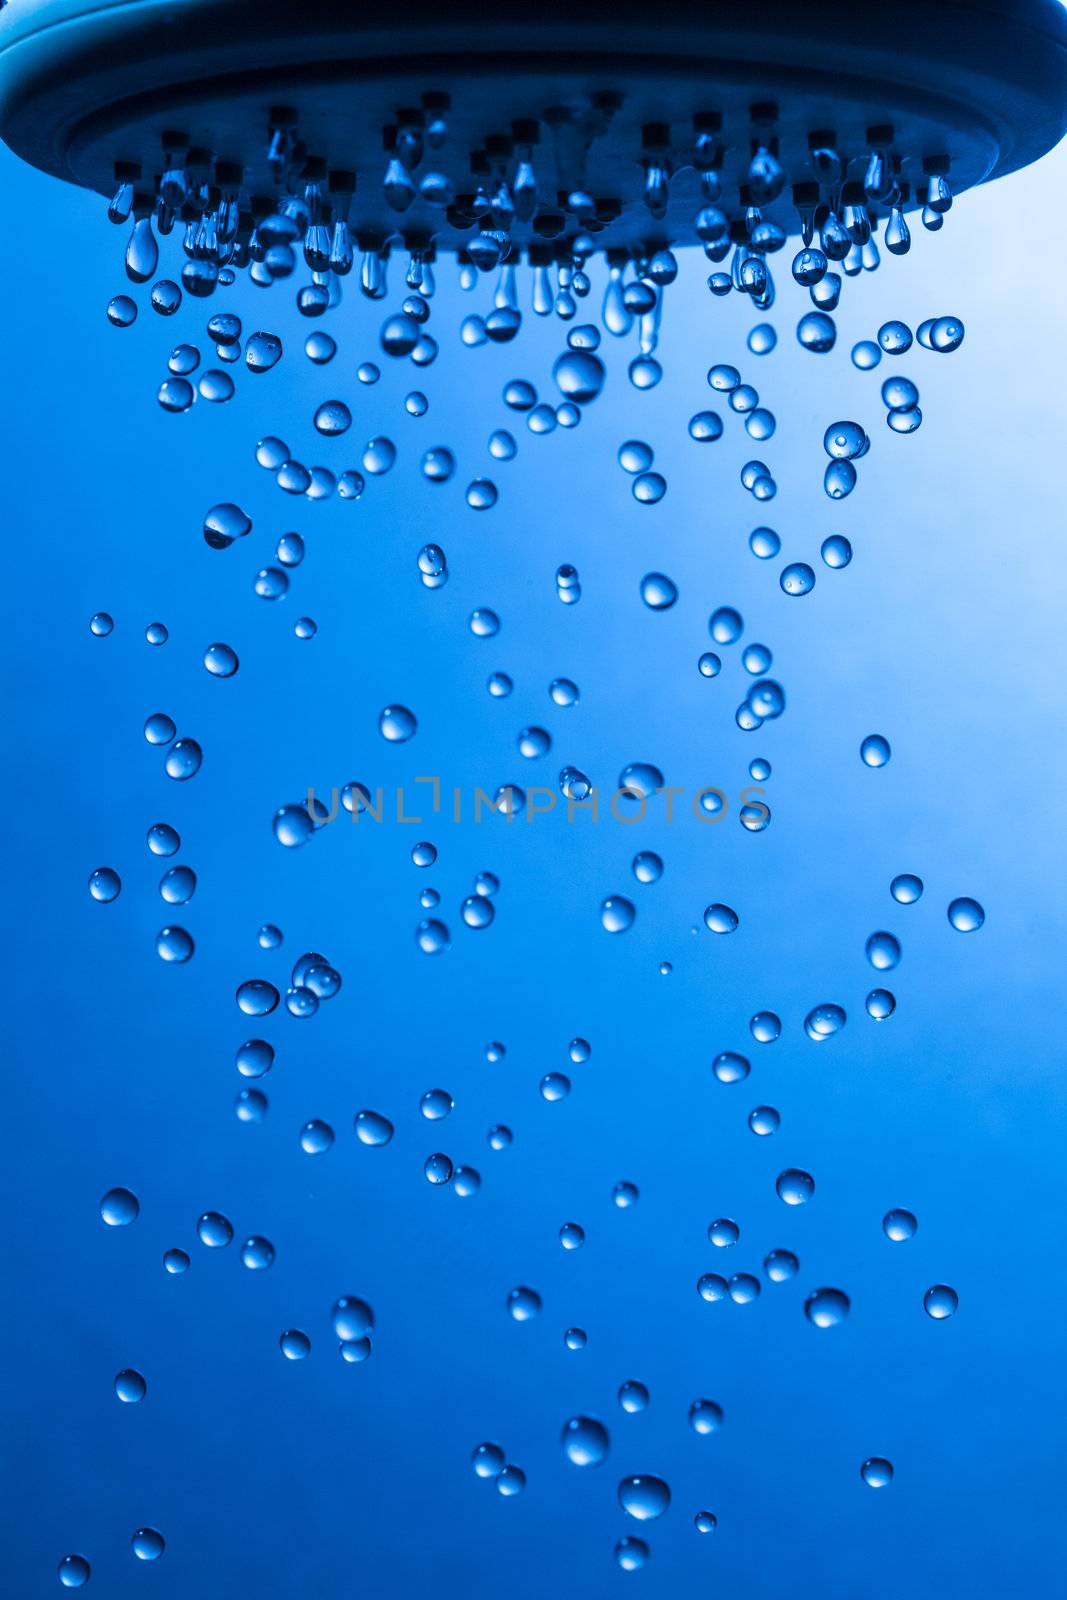 Shower Head with Droplet Water by Discovod